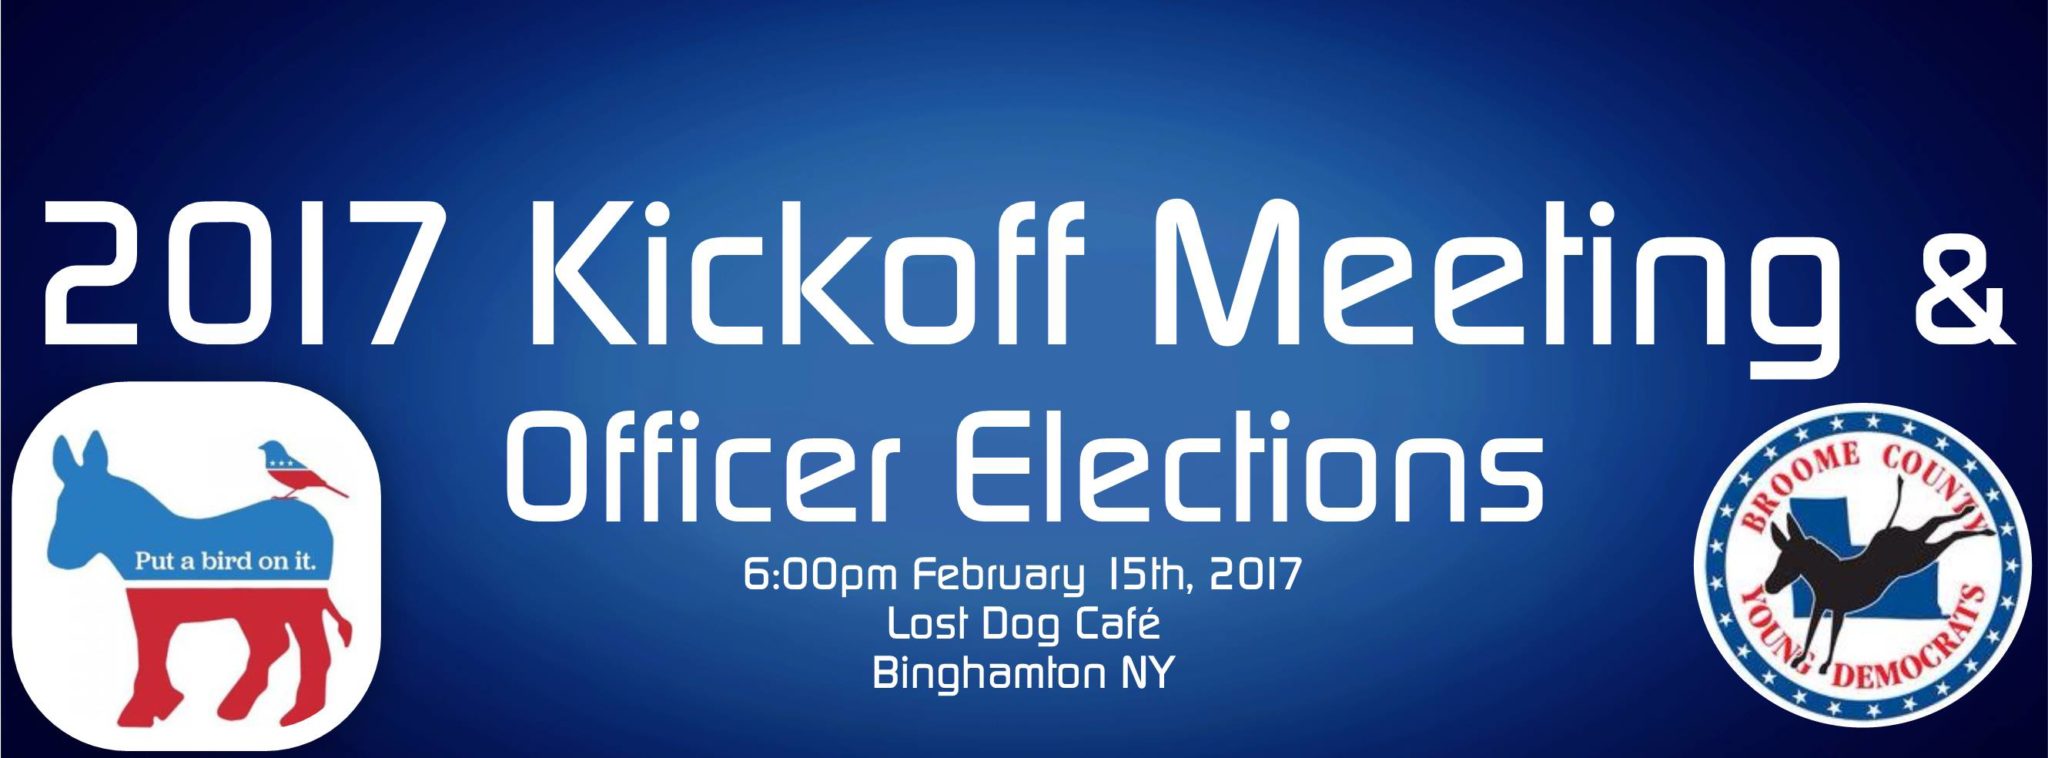 2017 Kickoff Meeting & Officer Elections